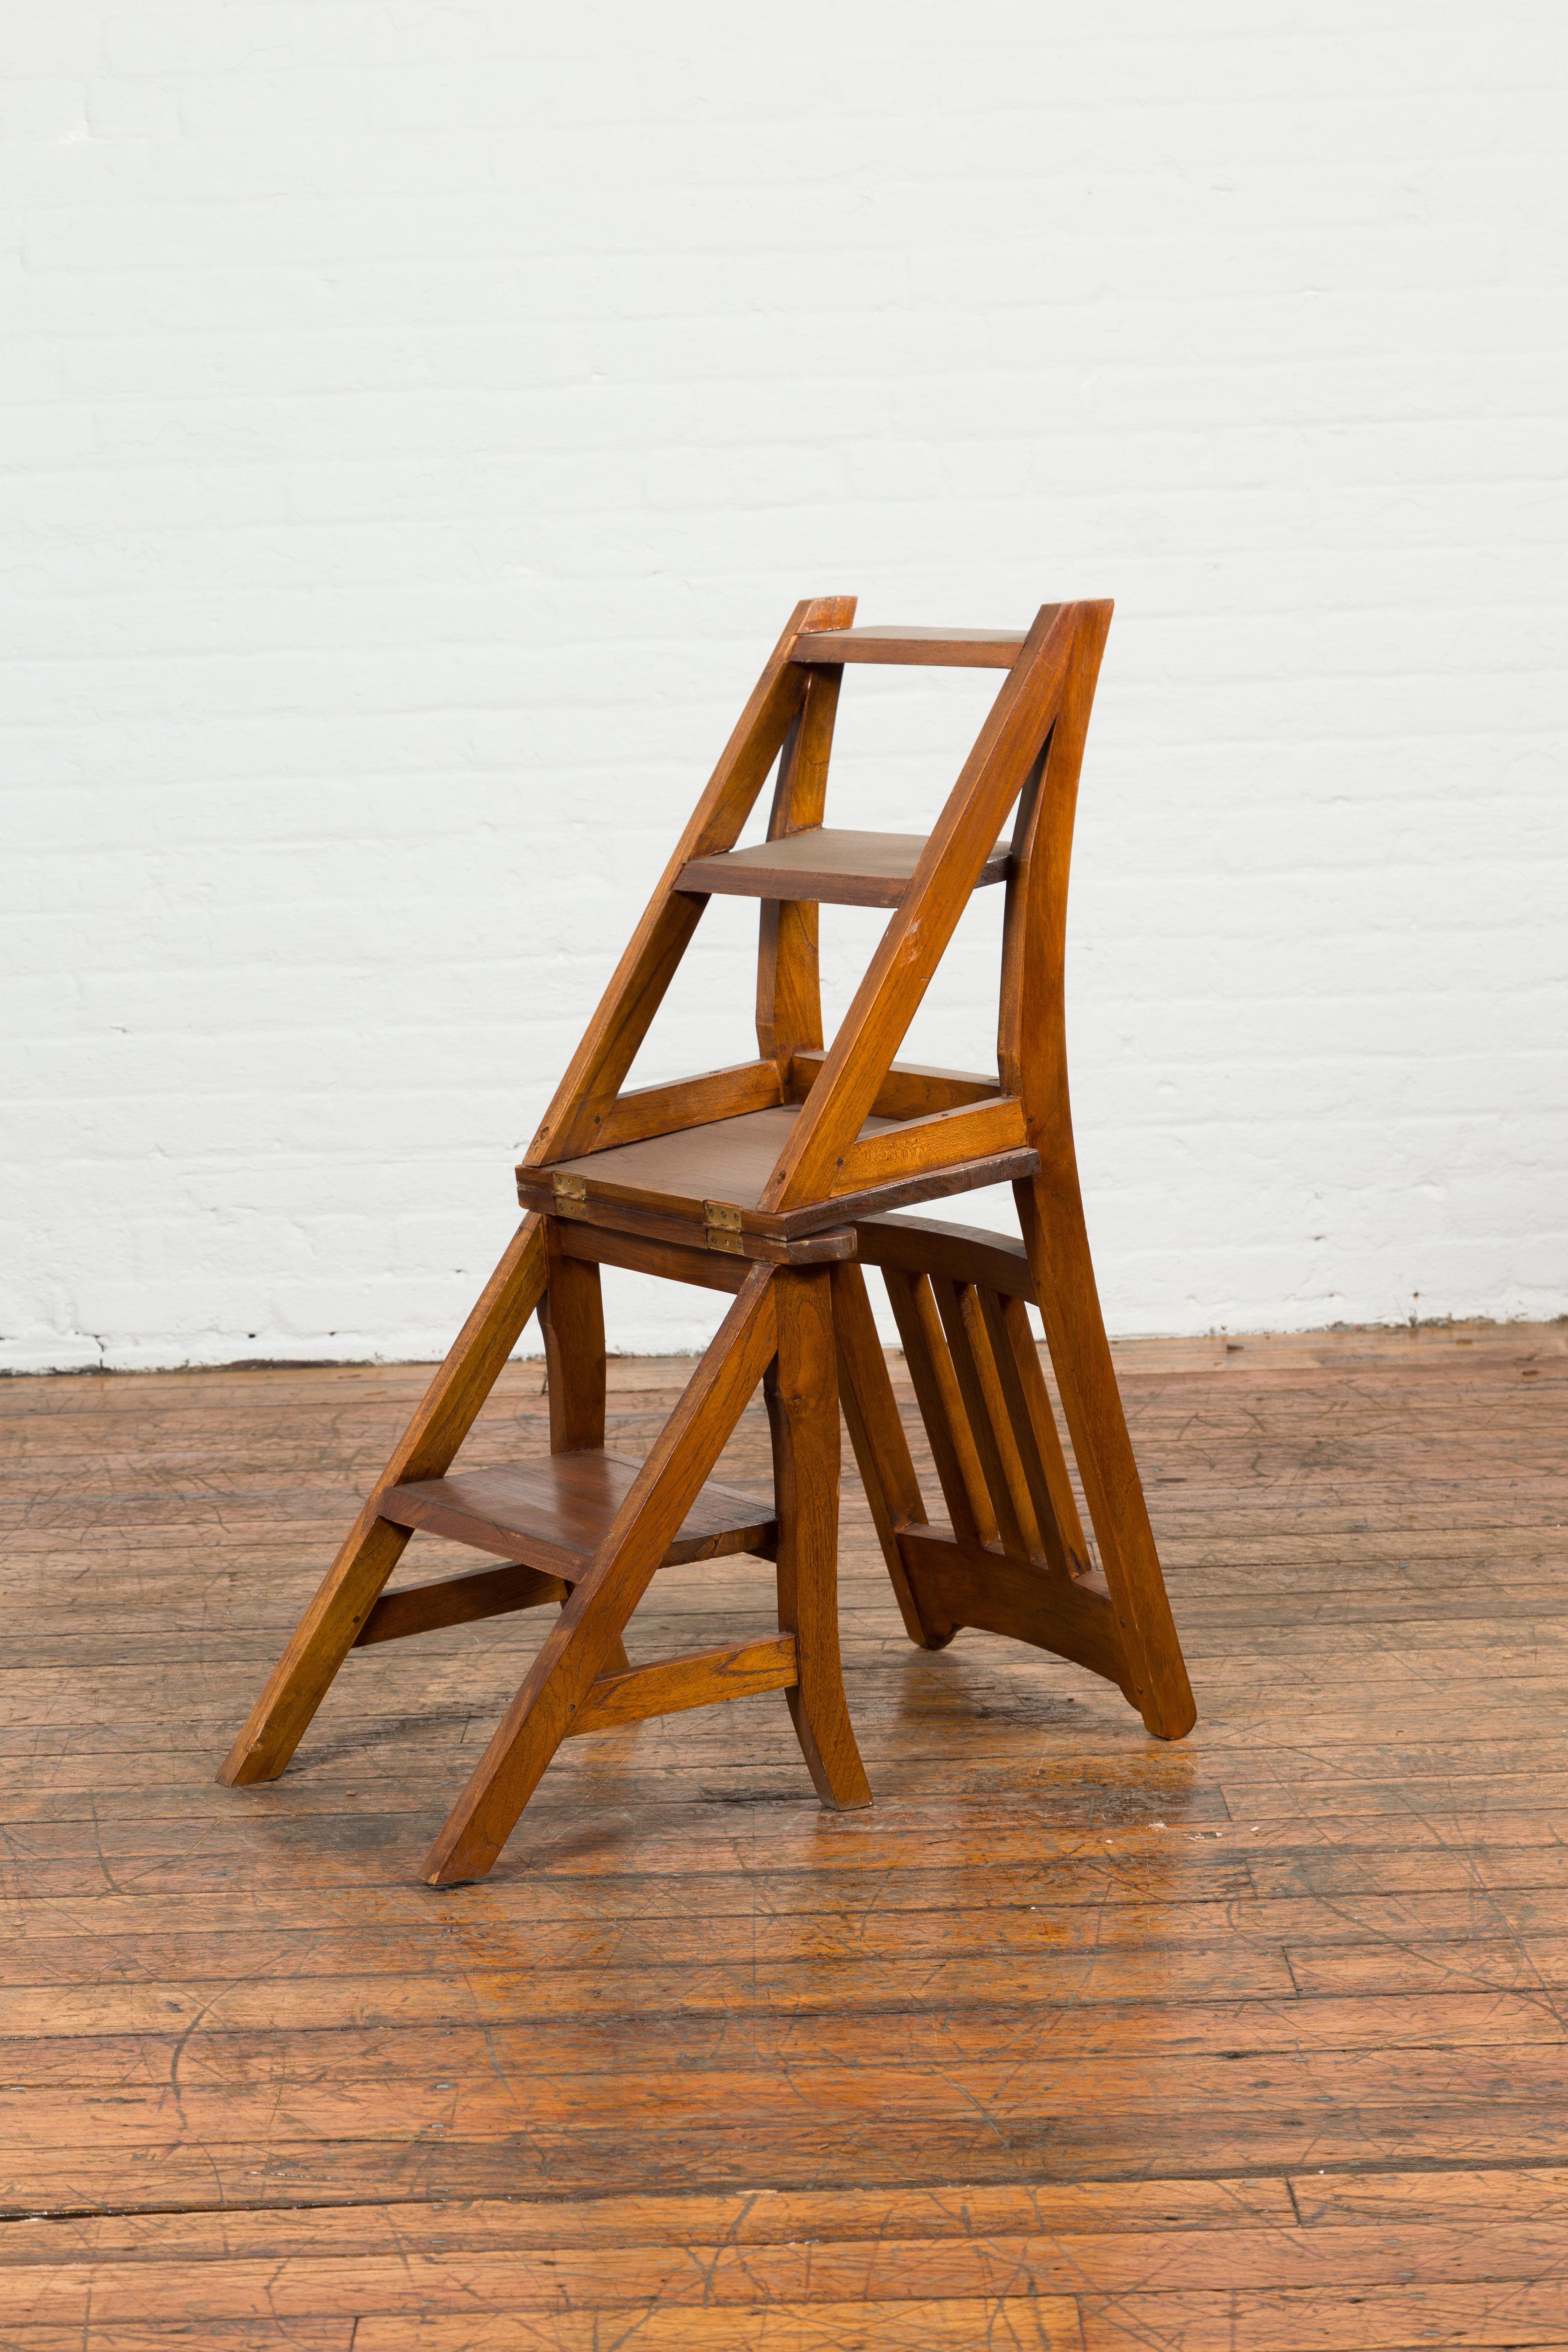 A vintage Indian metamorphic wooden ladder chair from the mid-20th century. Created in India during the midcentury period, this convenient chair features a slanted slatted back flowing into the hind legs. The lower section showcases a shelf, secured